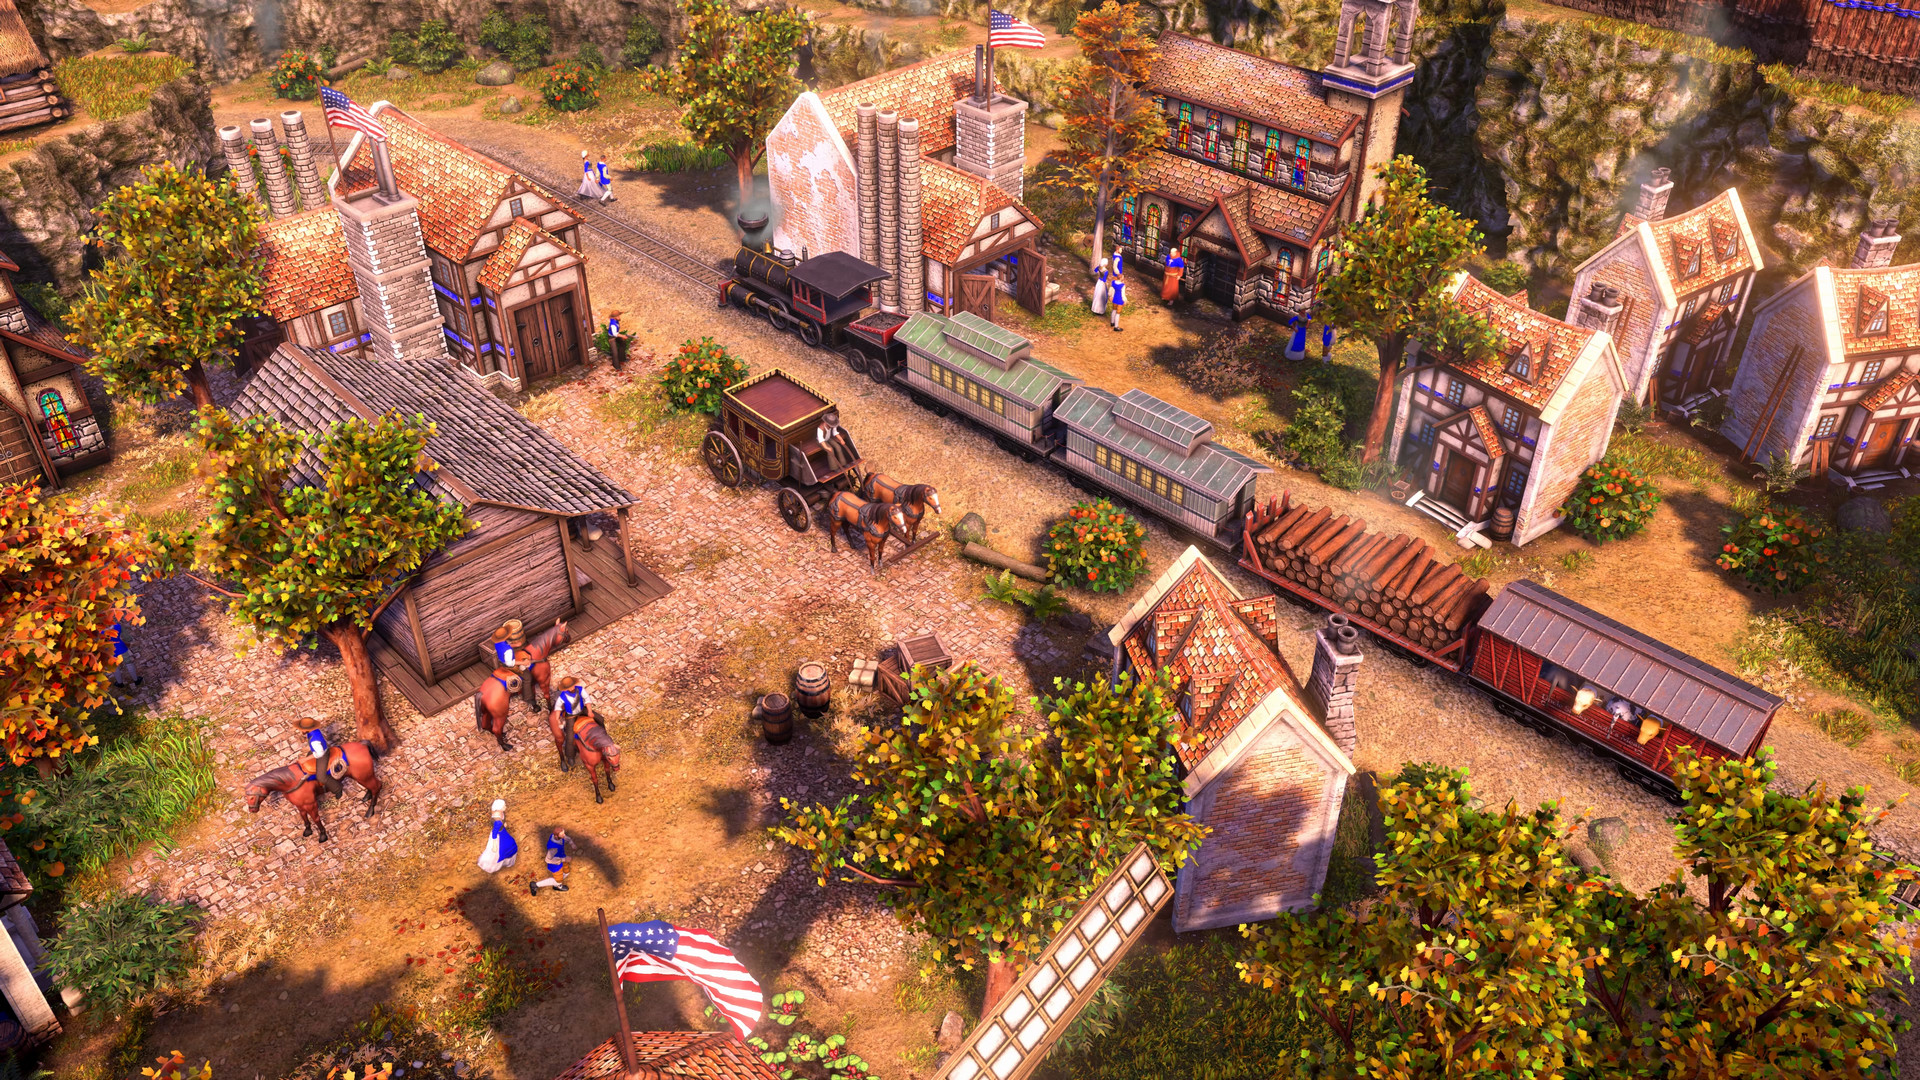 Age of Empires III: Definitive Edition Addresses “Problematic and Harmful” Depictions of Native Americans